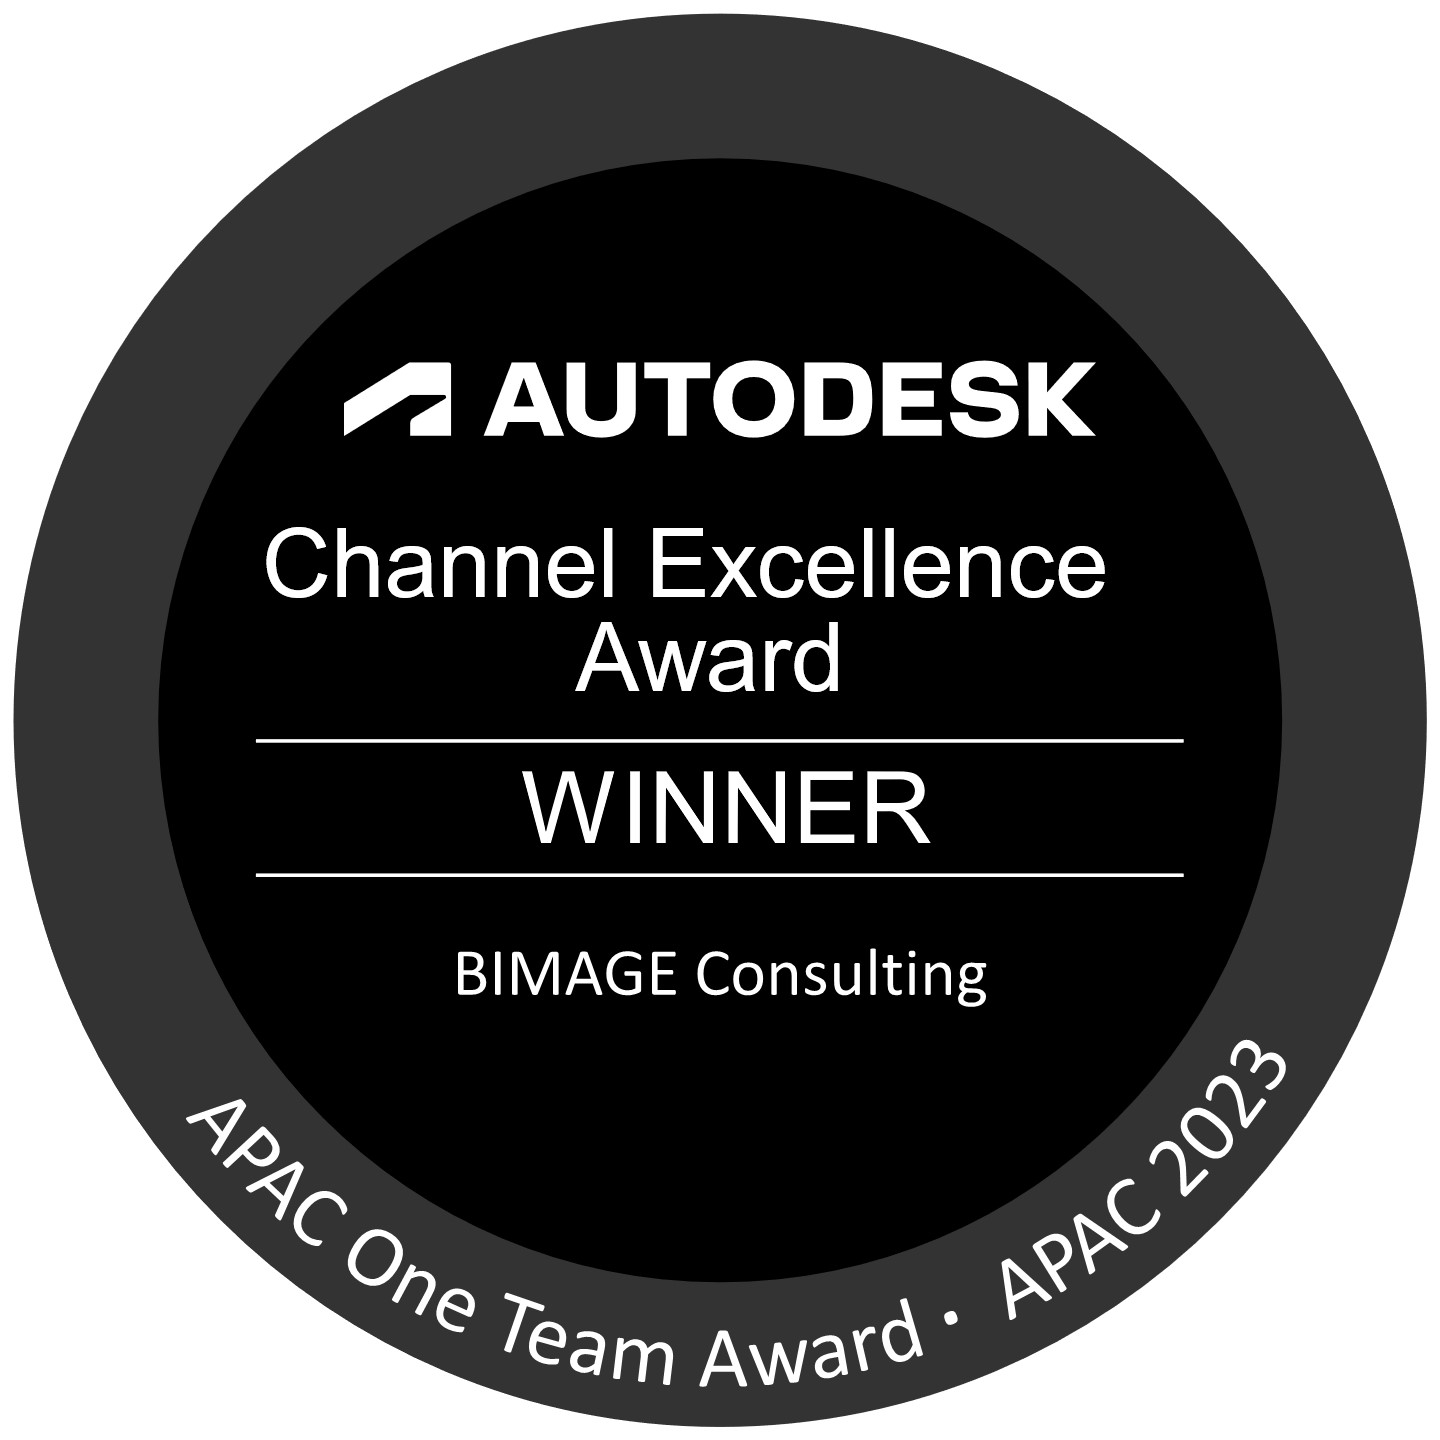 Autodesk Channel Excellence Award